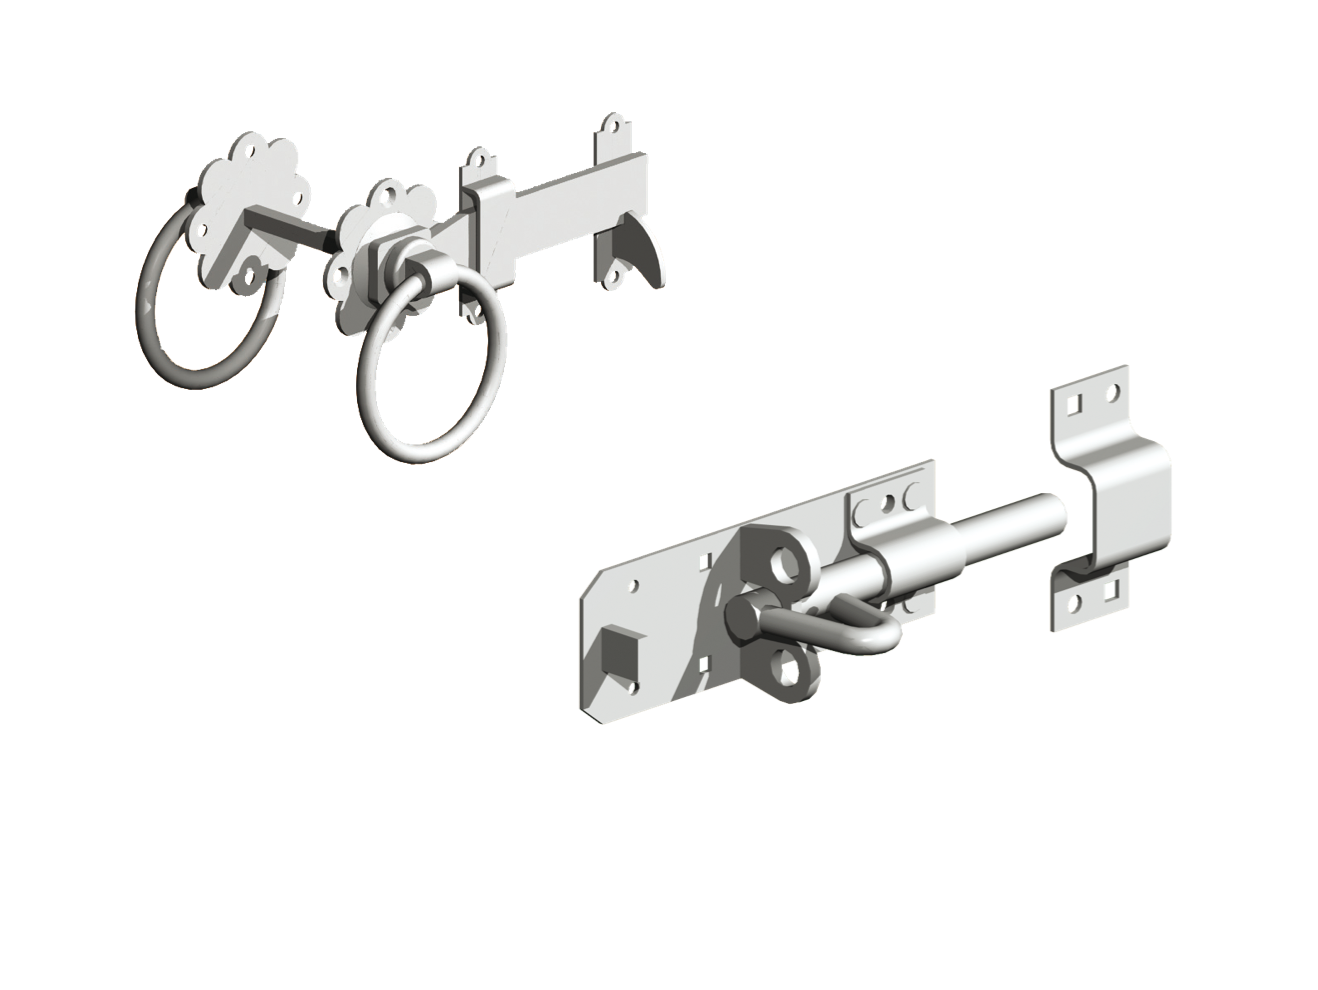 A diagram showing metal bolts, latches, and catches for gates